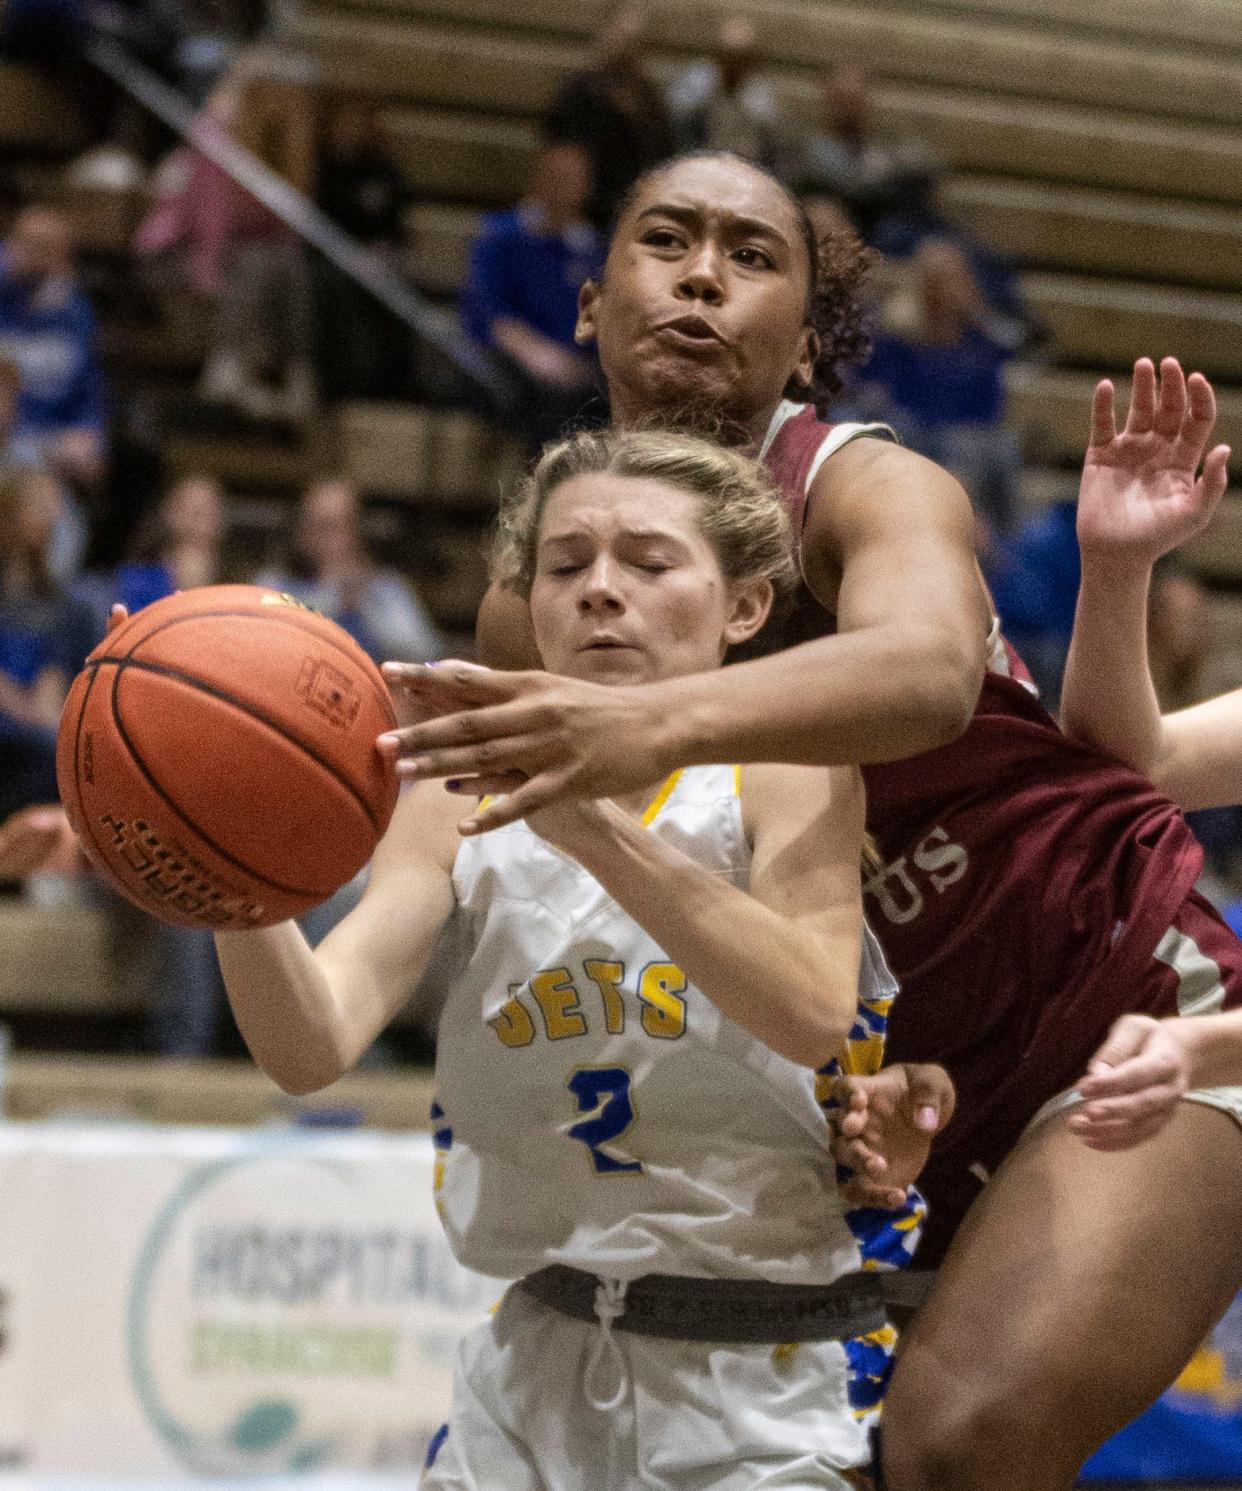 Mikaiya Beasley of Albertus Magnus fights Kayla Lederer of East Meadow for a rebound in a New York State girls Class AA basketball semifinal at Hudson Valley Community College in Troy March 15, 2024. Albertus Magnus defeated East Meadow 89-51 to advance to the Class AA final on Saturday.